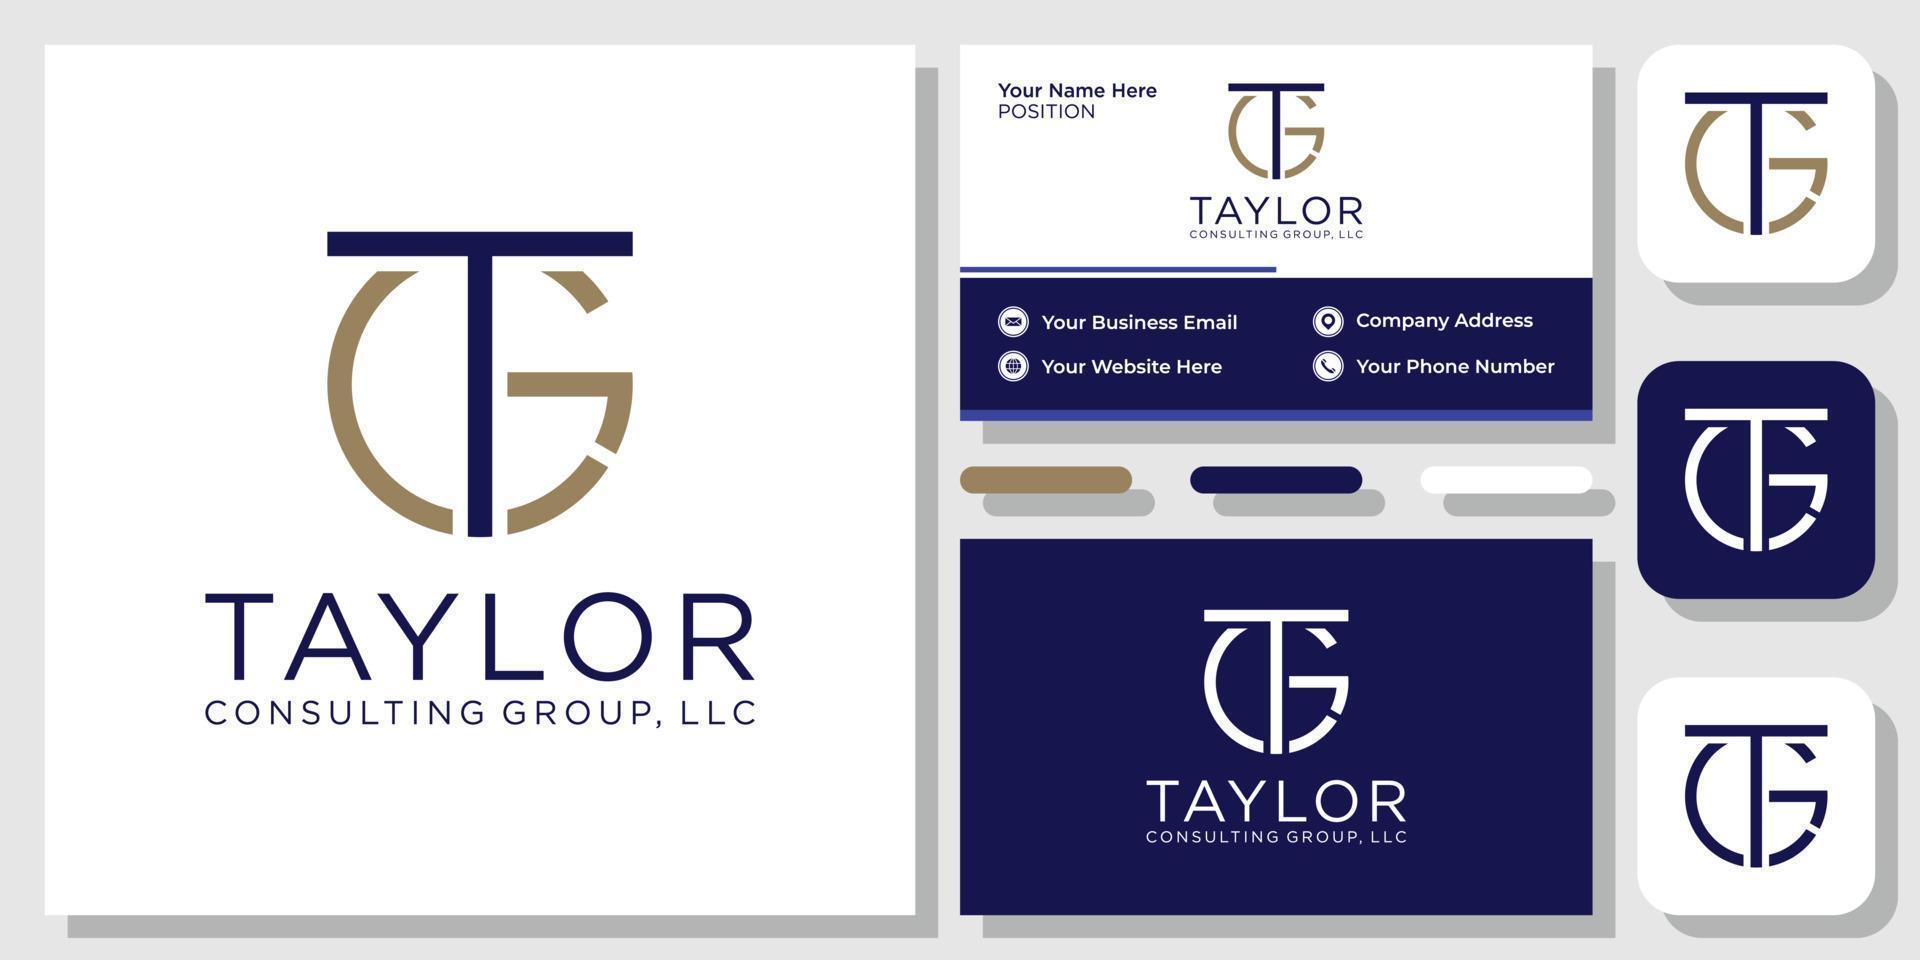 Taylor Consulting Group llc letters bold fashion service clothes with business card template vector